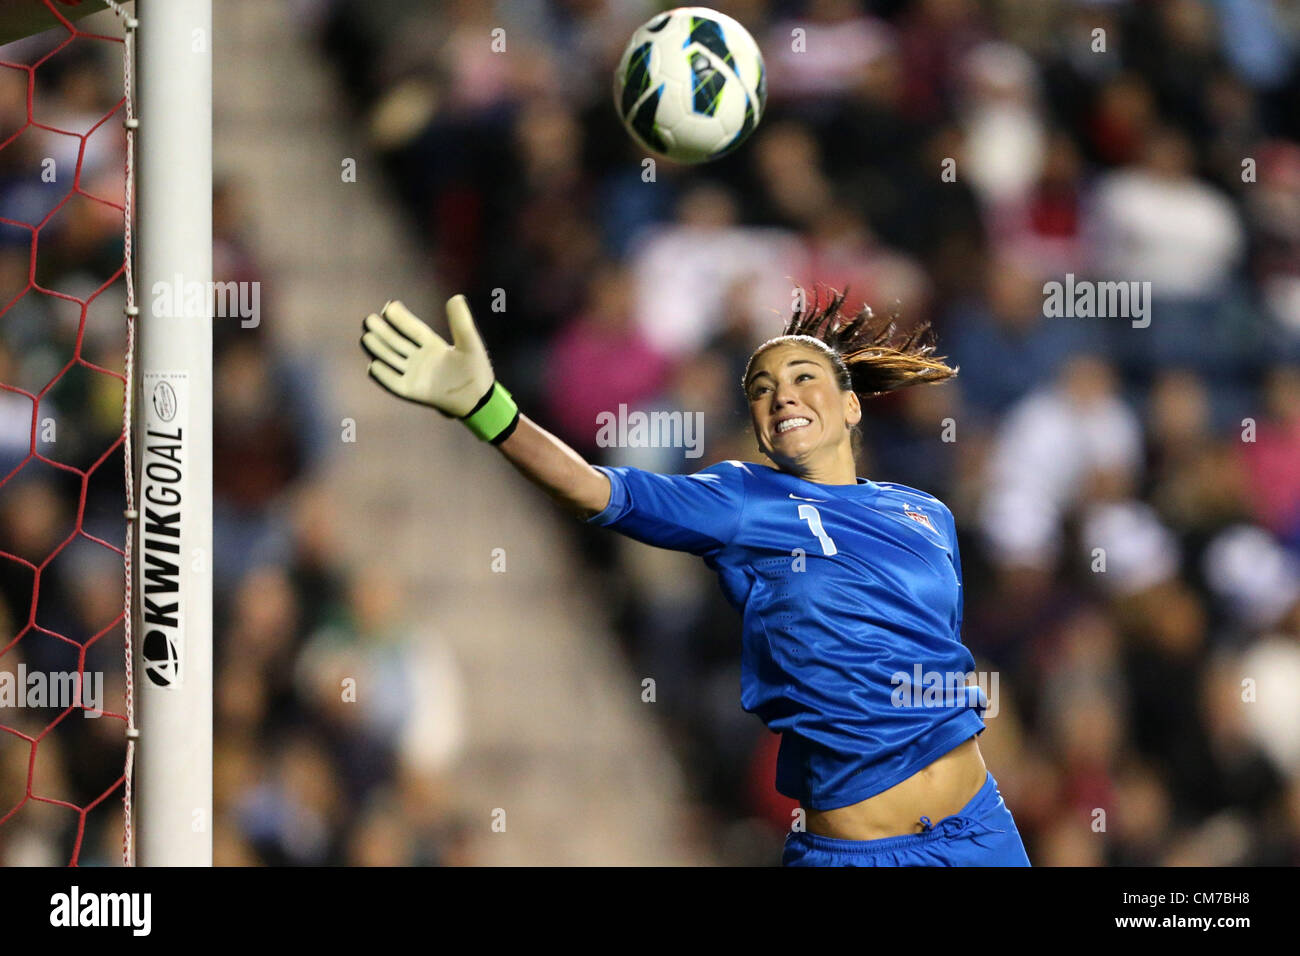 20.10.2012. Chicago, USA.  Hope Solo (USA) watches a Germany shot sail wide of the goal. The United States Women's National Team played the Germany Women's National Team at Toyota Park in Bridgeview, Illinois in a women's international friendly soccer match. The game ended in a 1-1 tie. Stock Photo